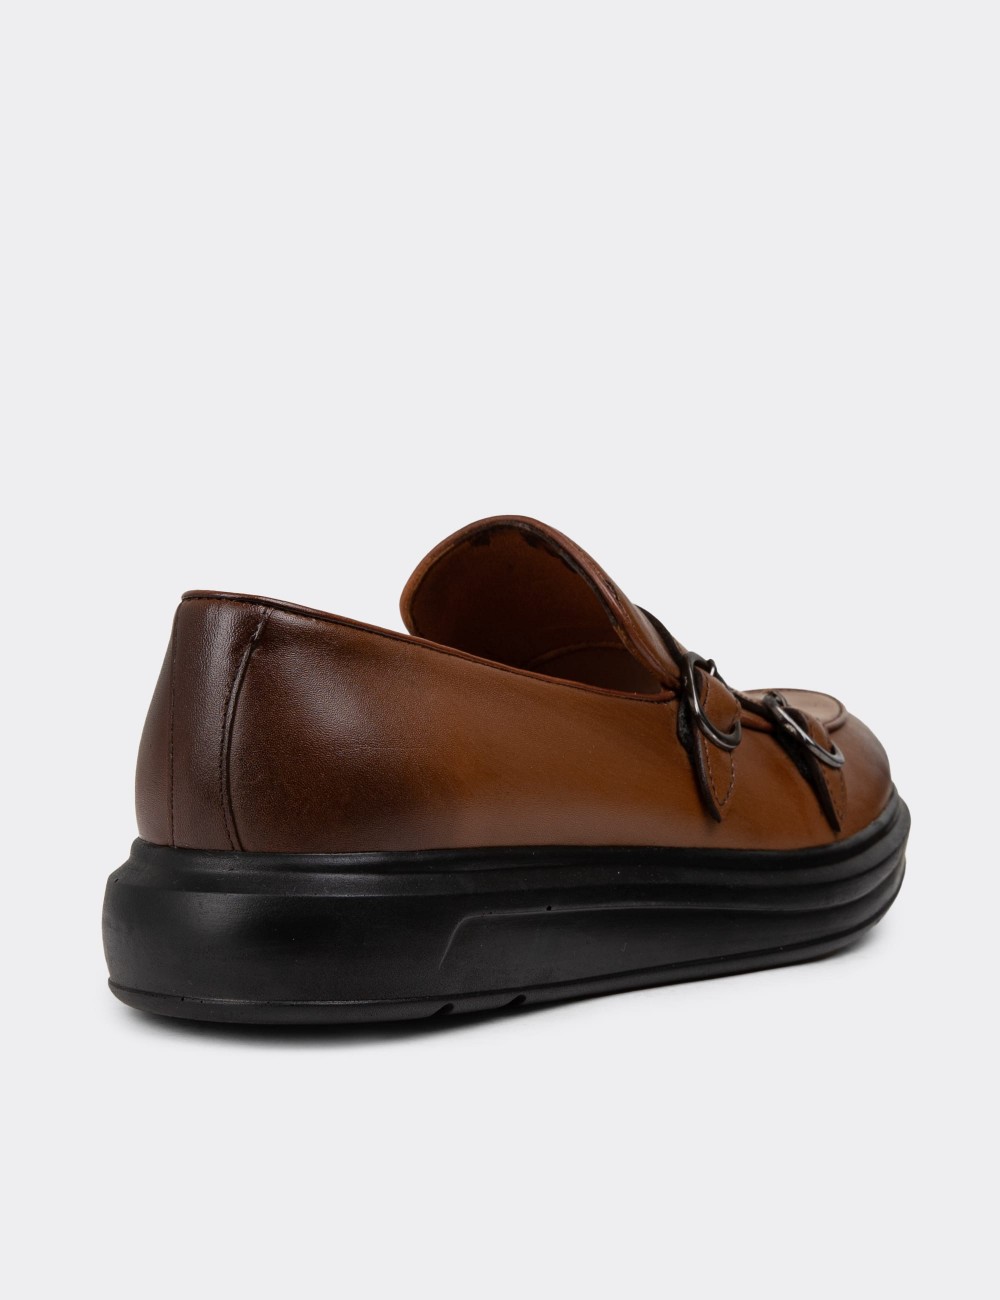 Brown Leather Double Monk-Strap Loafers - 01843MKHVP01